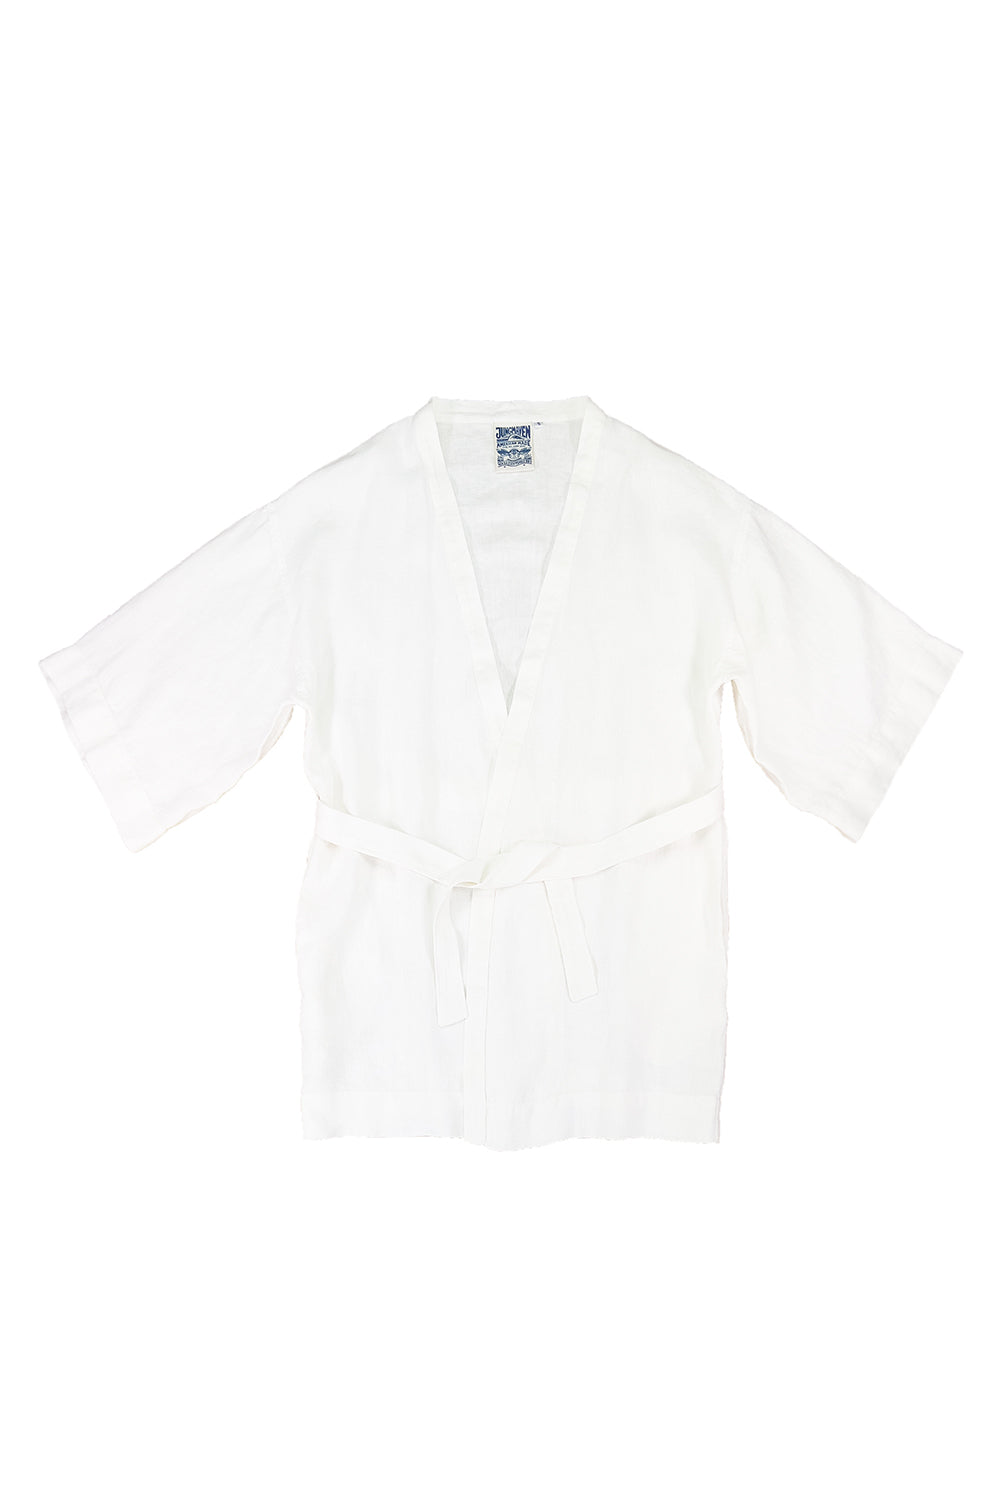 Bali Cover-up | Jungmaven Hemp Clothing & Accessories / Color: Washed White